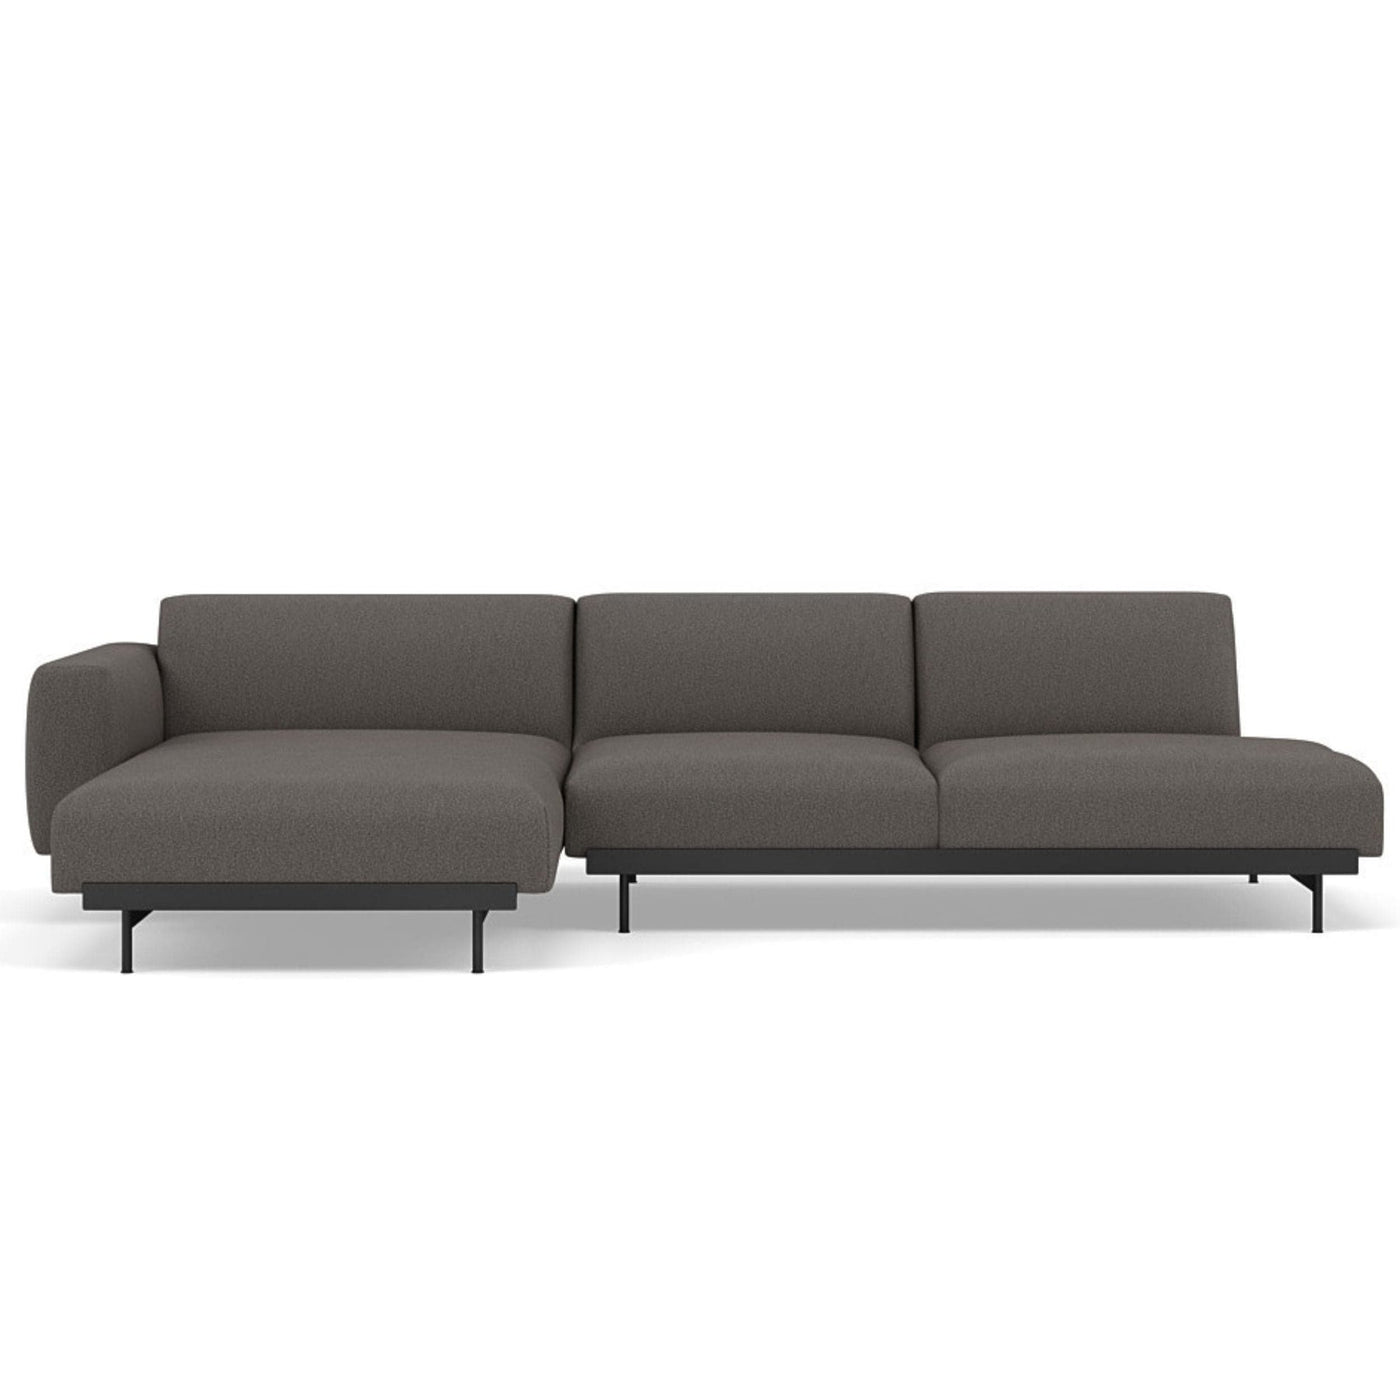 Muuto In Situ Modular 3 Seater Sofa, configuration 9. Made to order from someday designs. #colour_clay-9